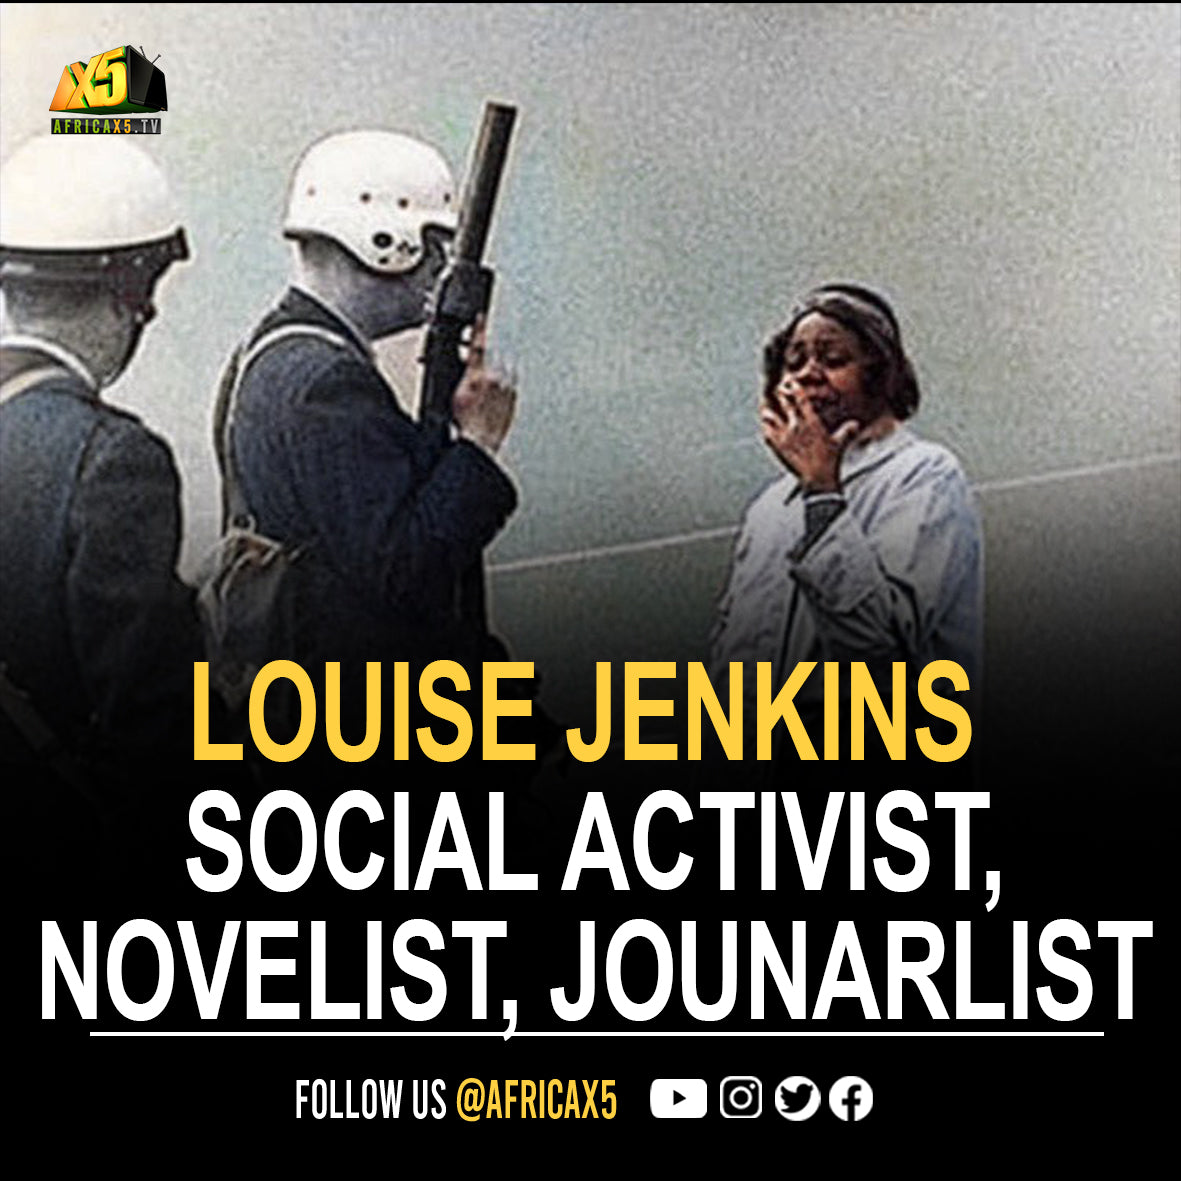 Louise Jenkins Meriwether, a novelist, essayist, journalist and social activist, was the only daughter of Marion Lloyd Jenkins and his wife, Julia.